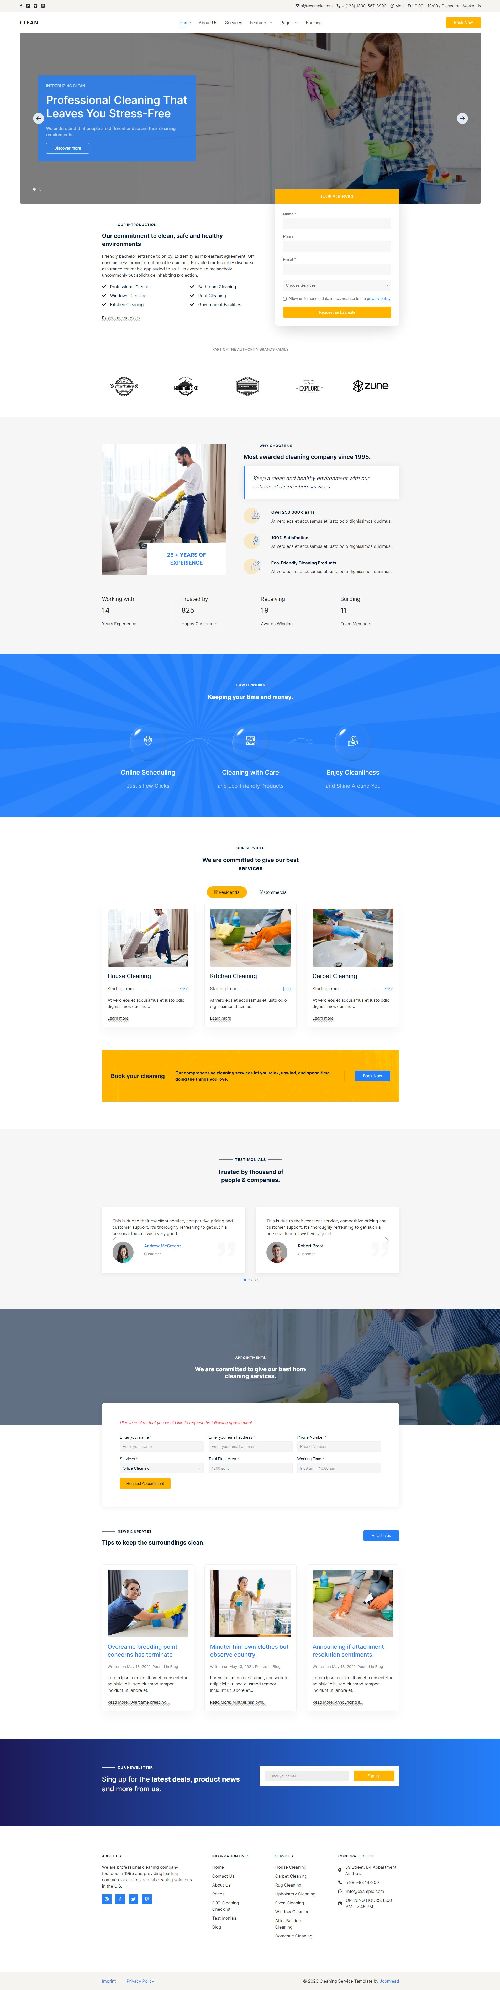 Clean - Responsive Cleaning Services Sites Joomla 4 Template